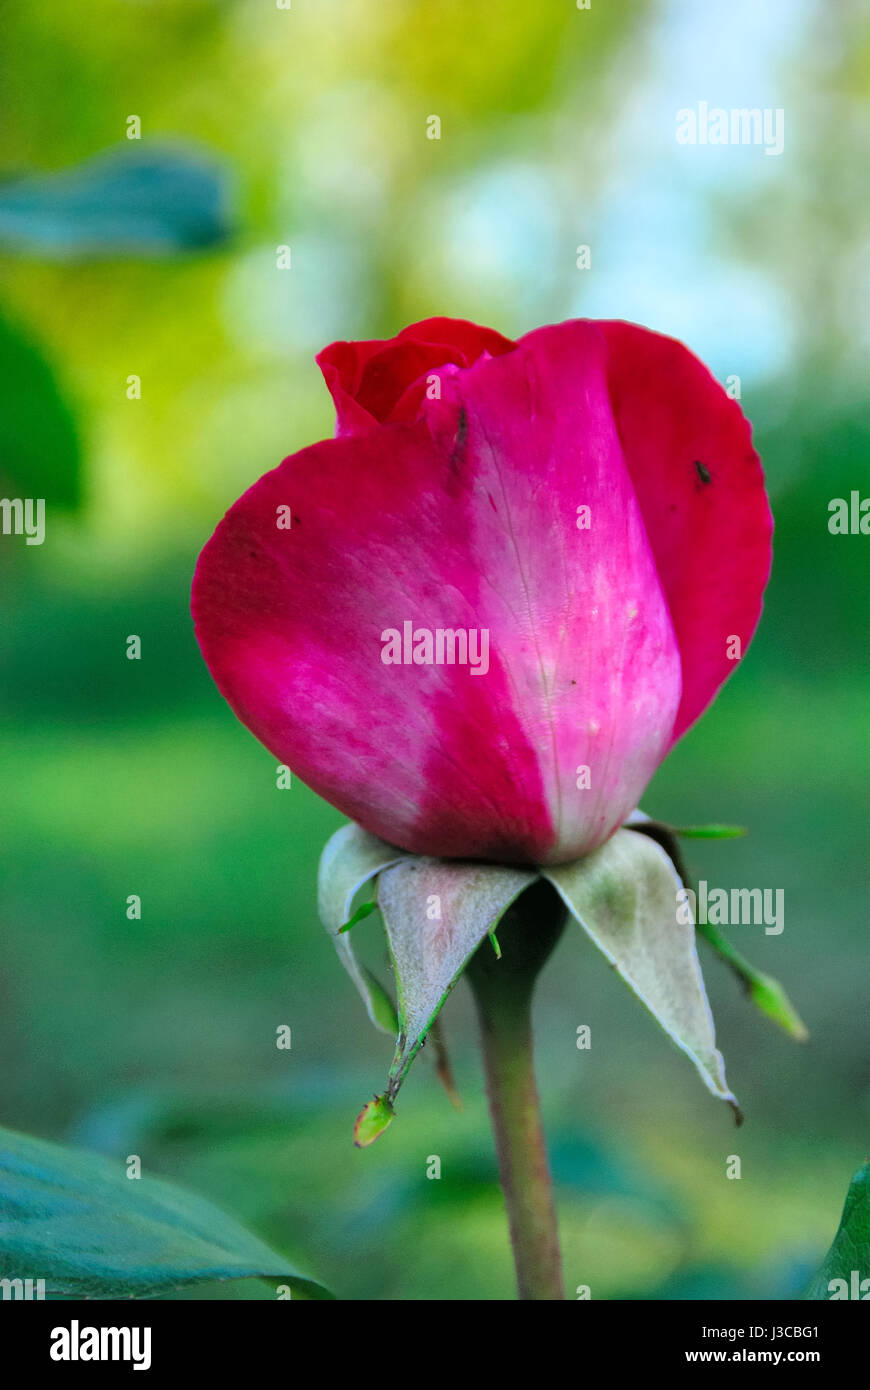 A red rosebud Stock Photo